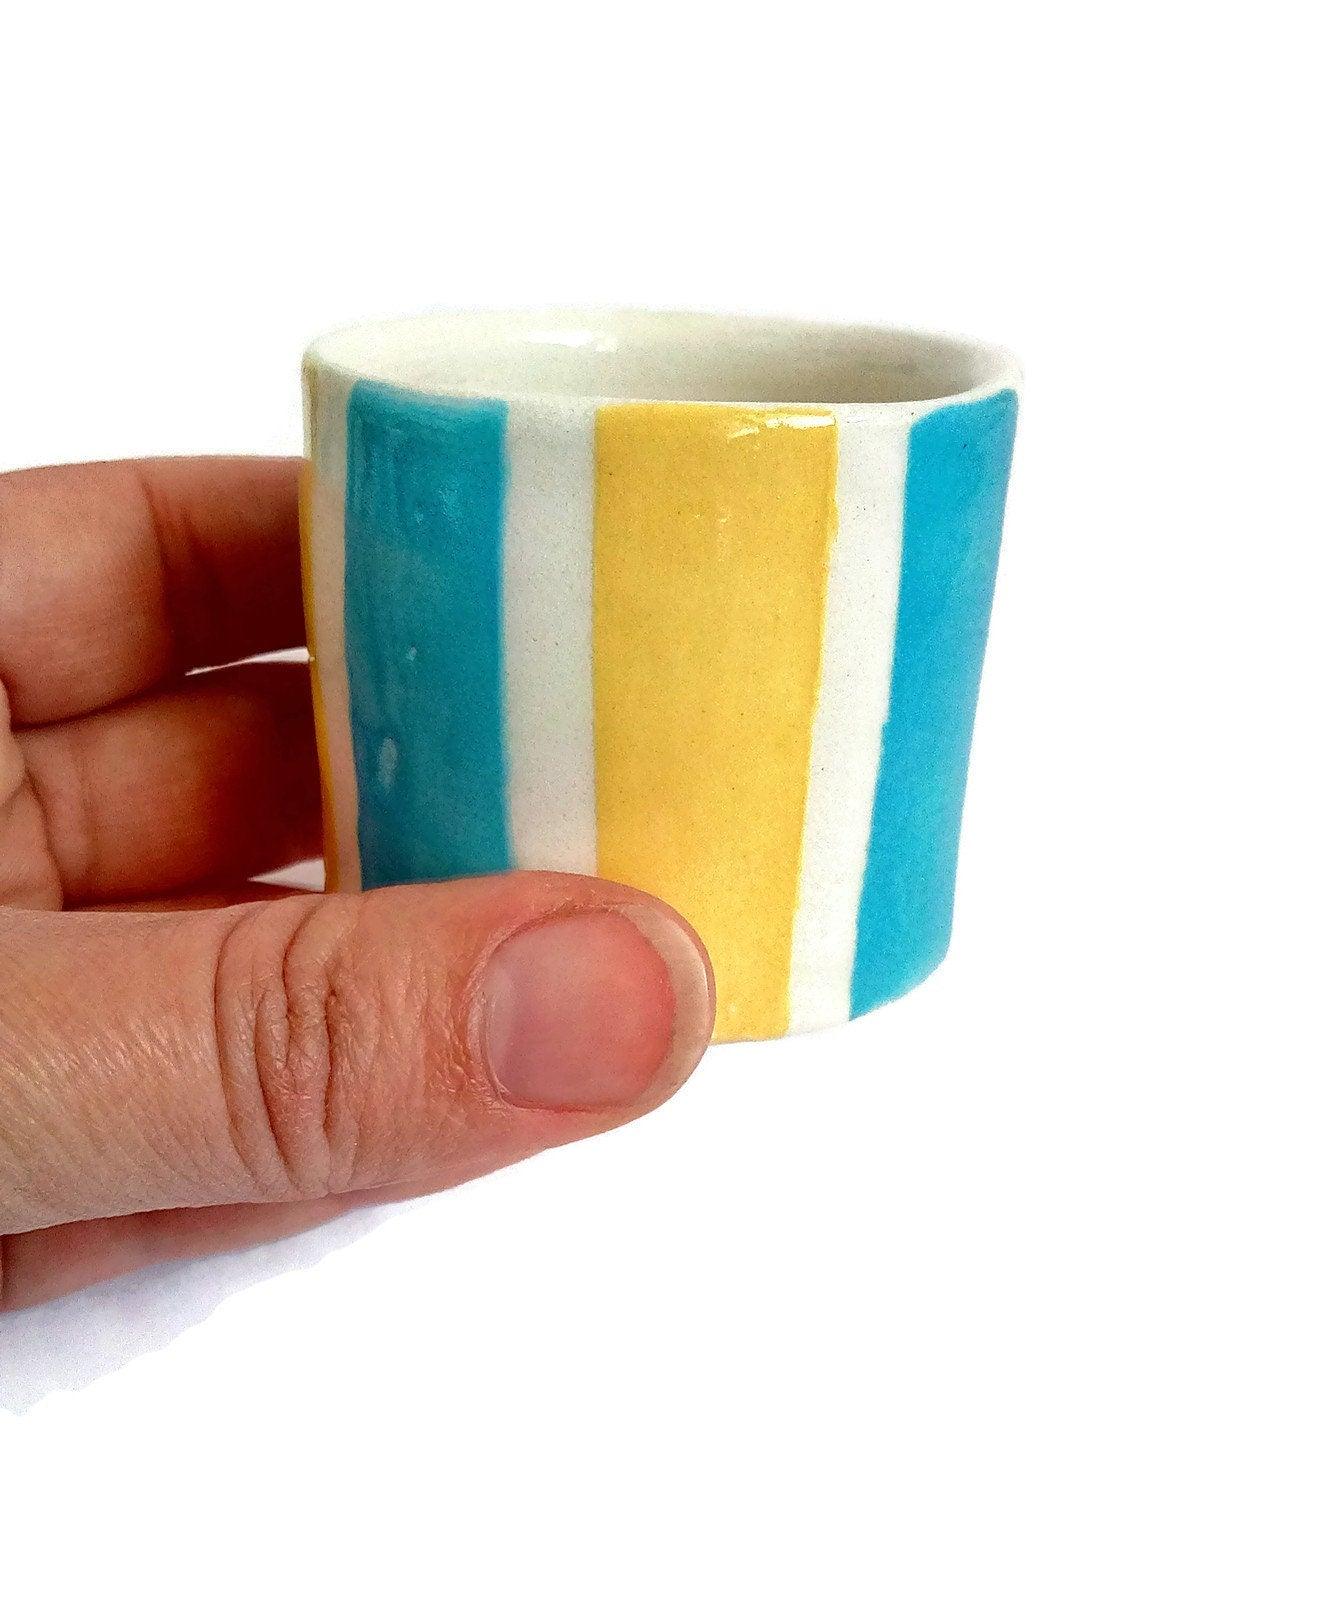 1Pc Handmade Ceramic Espresso Cup, Best Coffee Lovers Gifts For Him, Small Pottery Mug, Striped Blue And Yellow Shot Glass For Men - Ceramica Ana Rafael